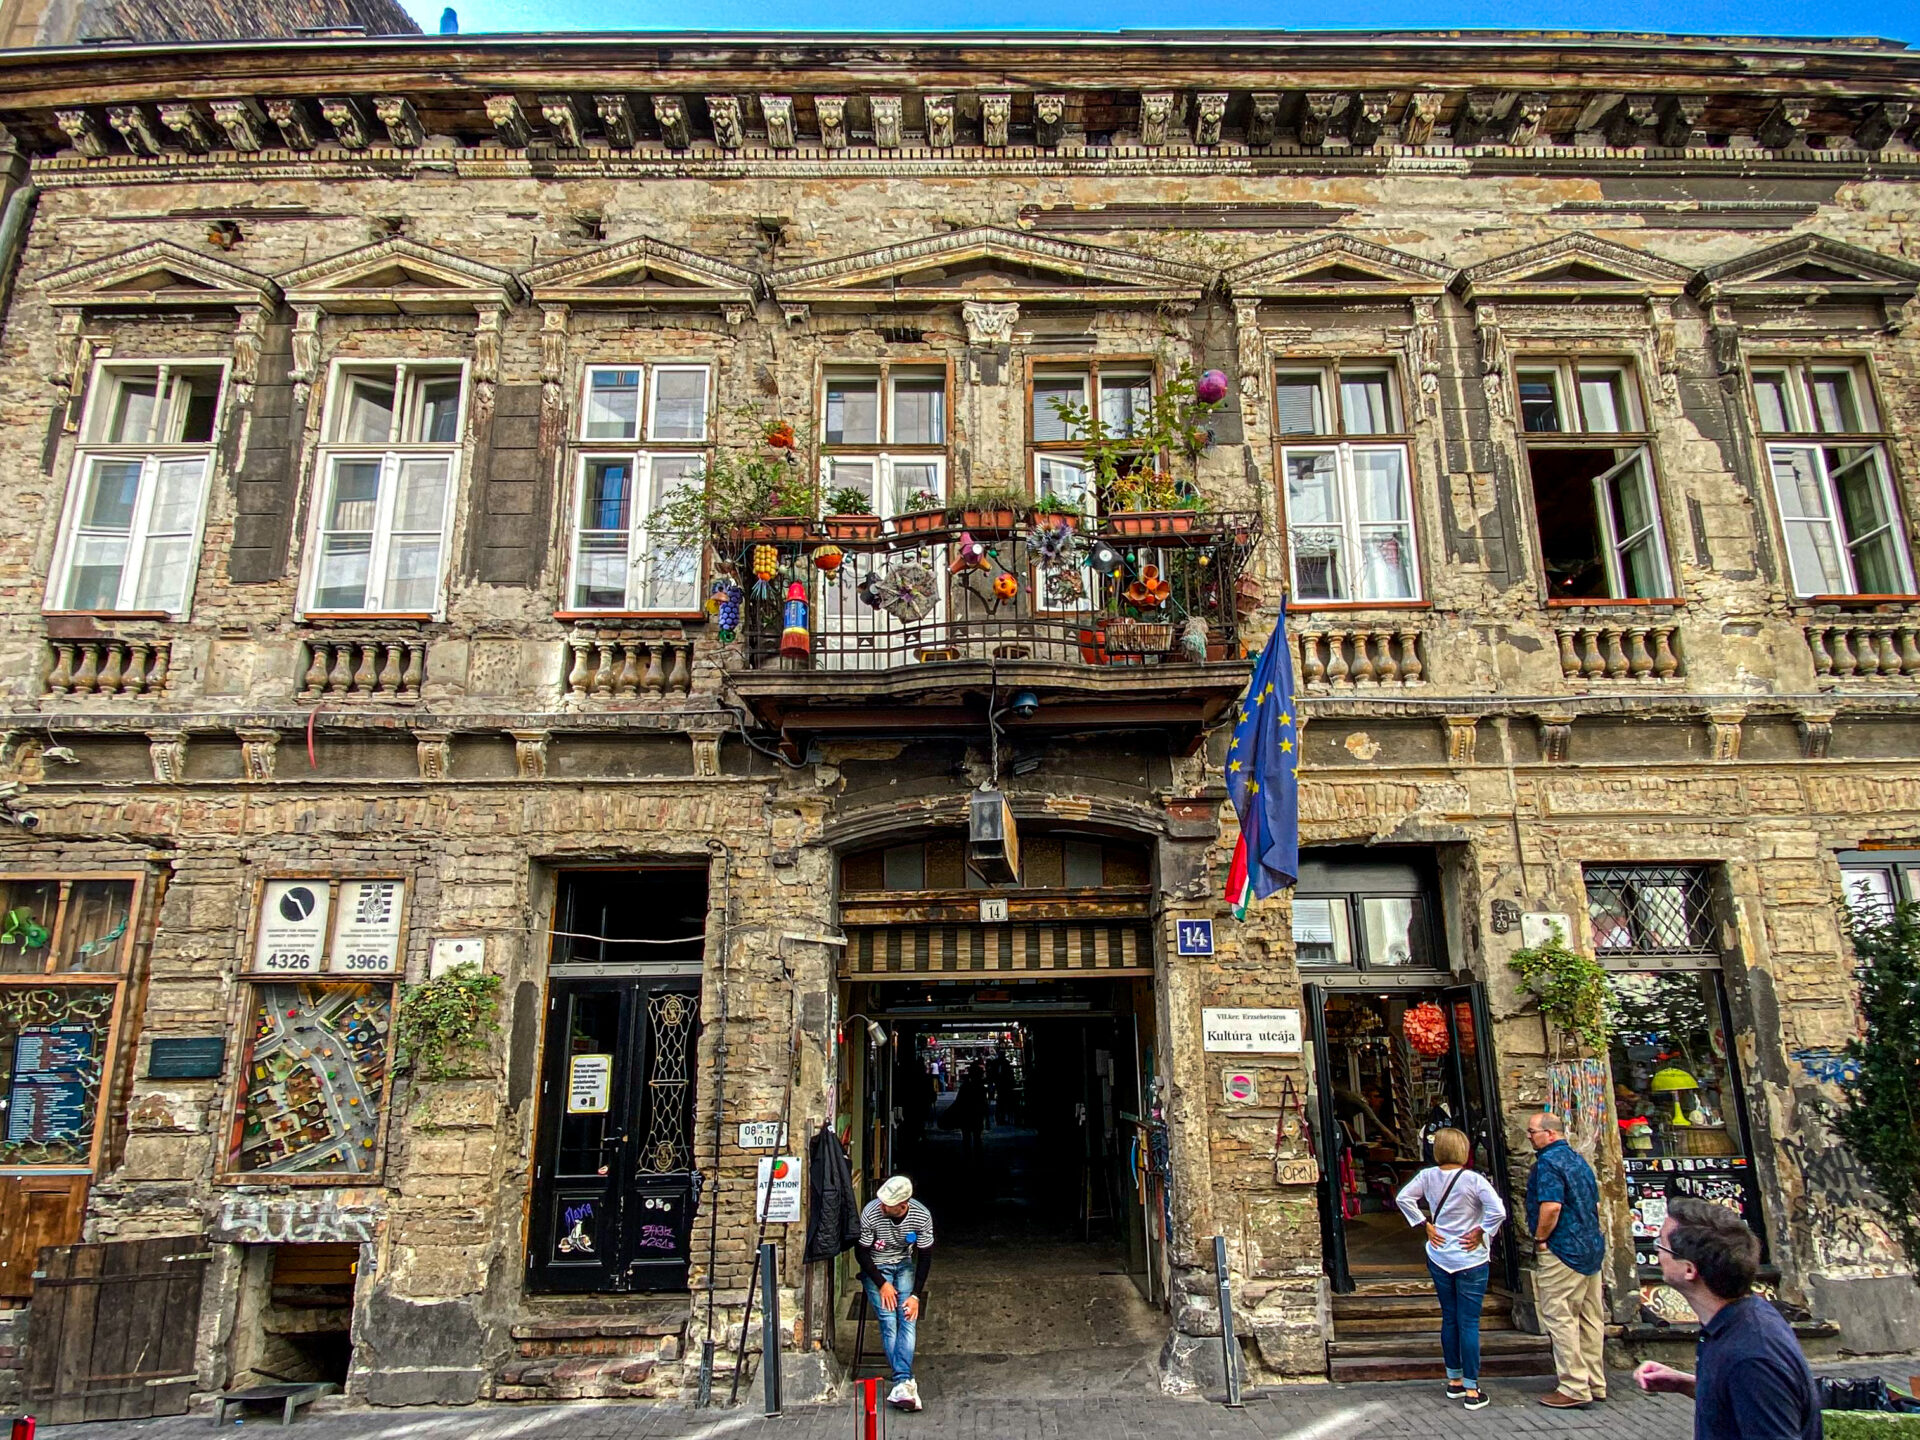 Szimpla Kert, the oldest and most popular ruin bar in Budapest